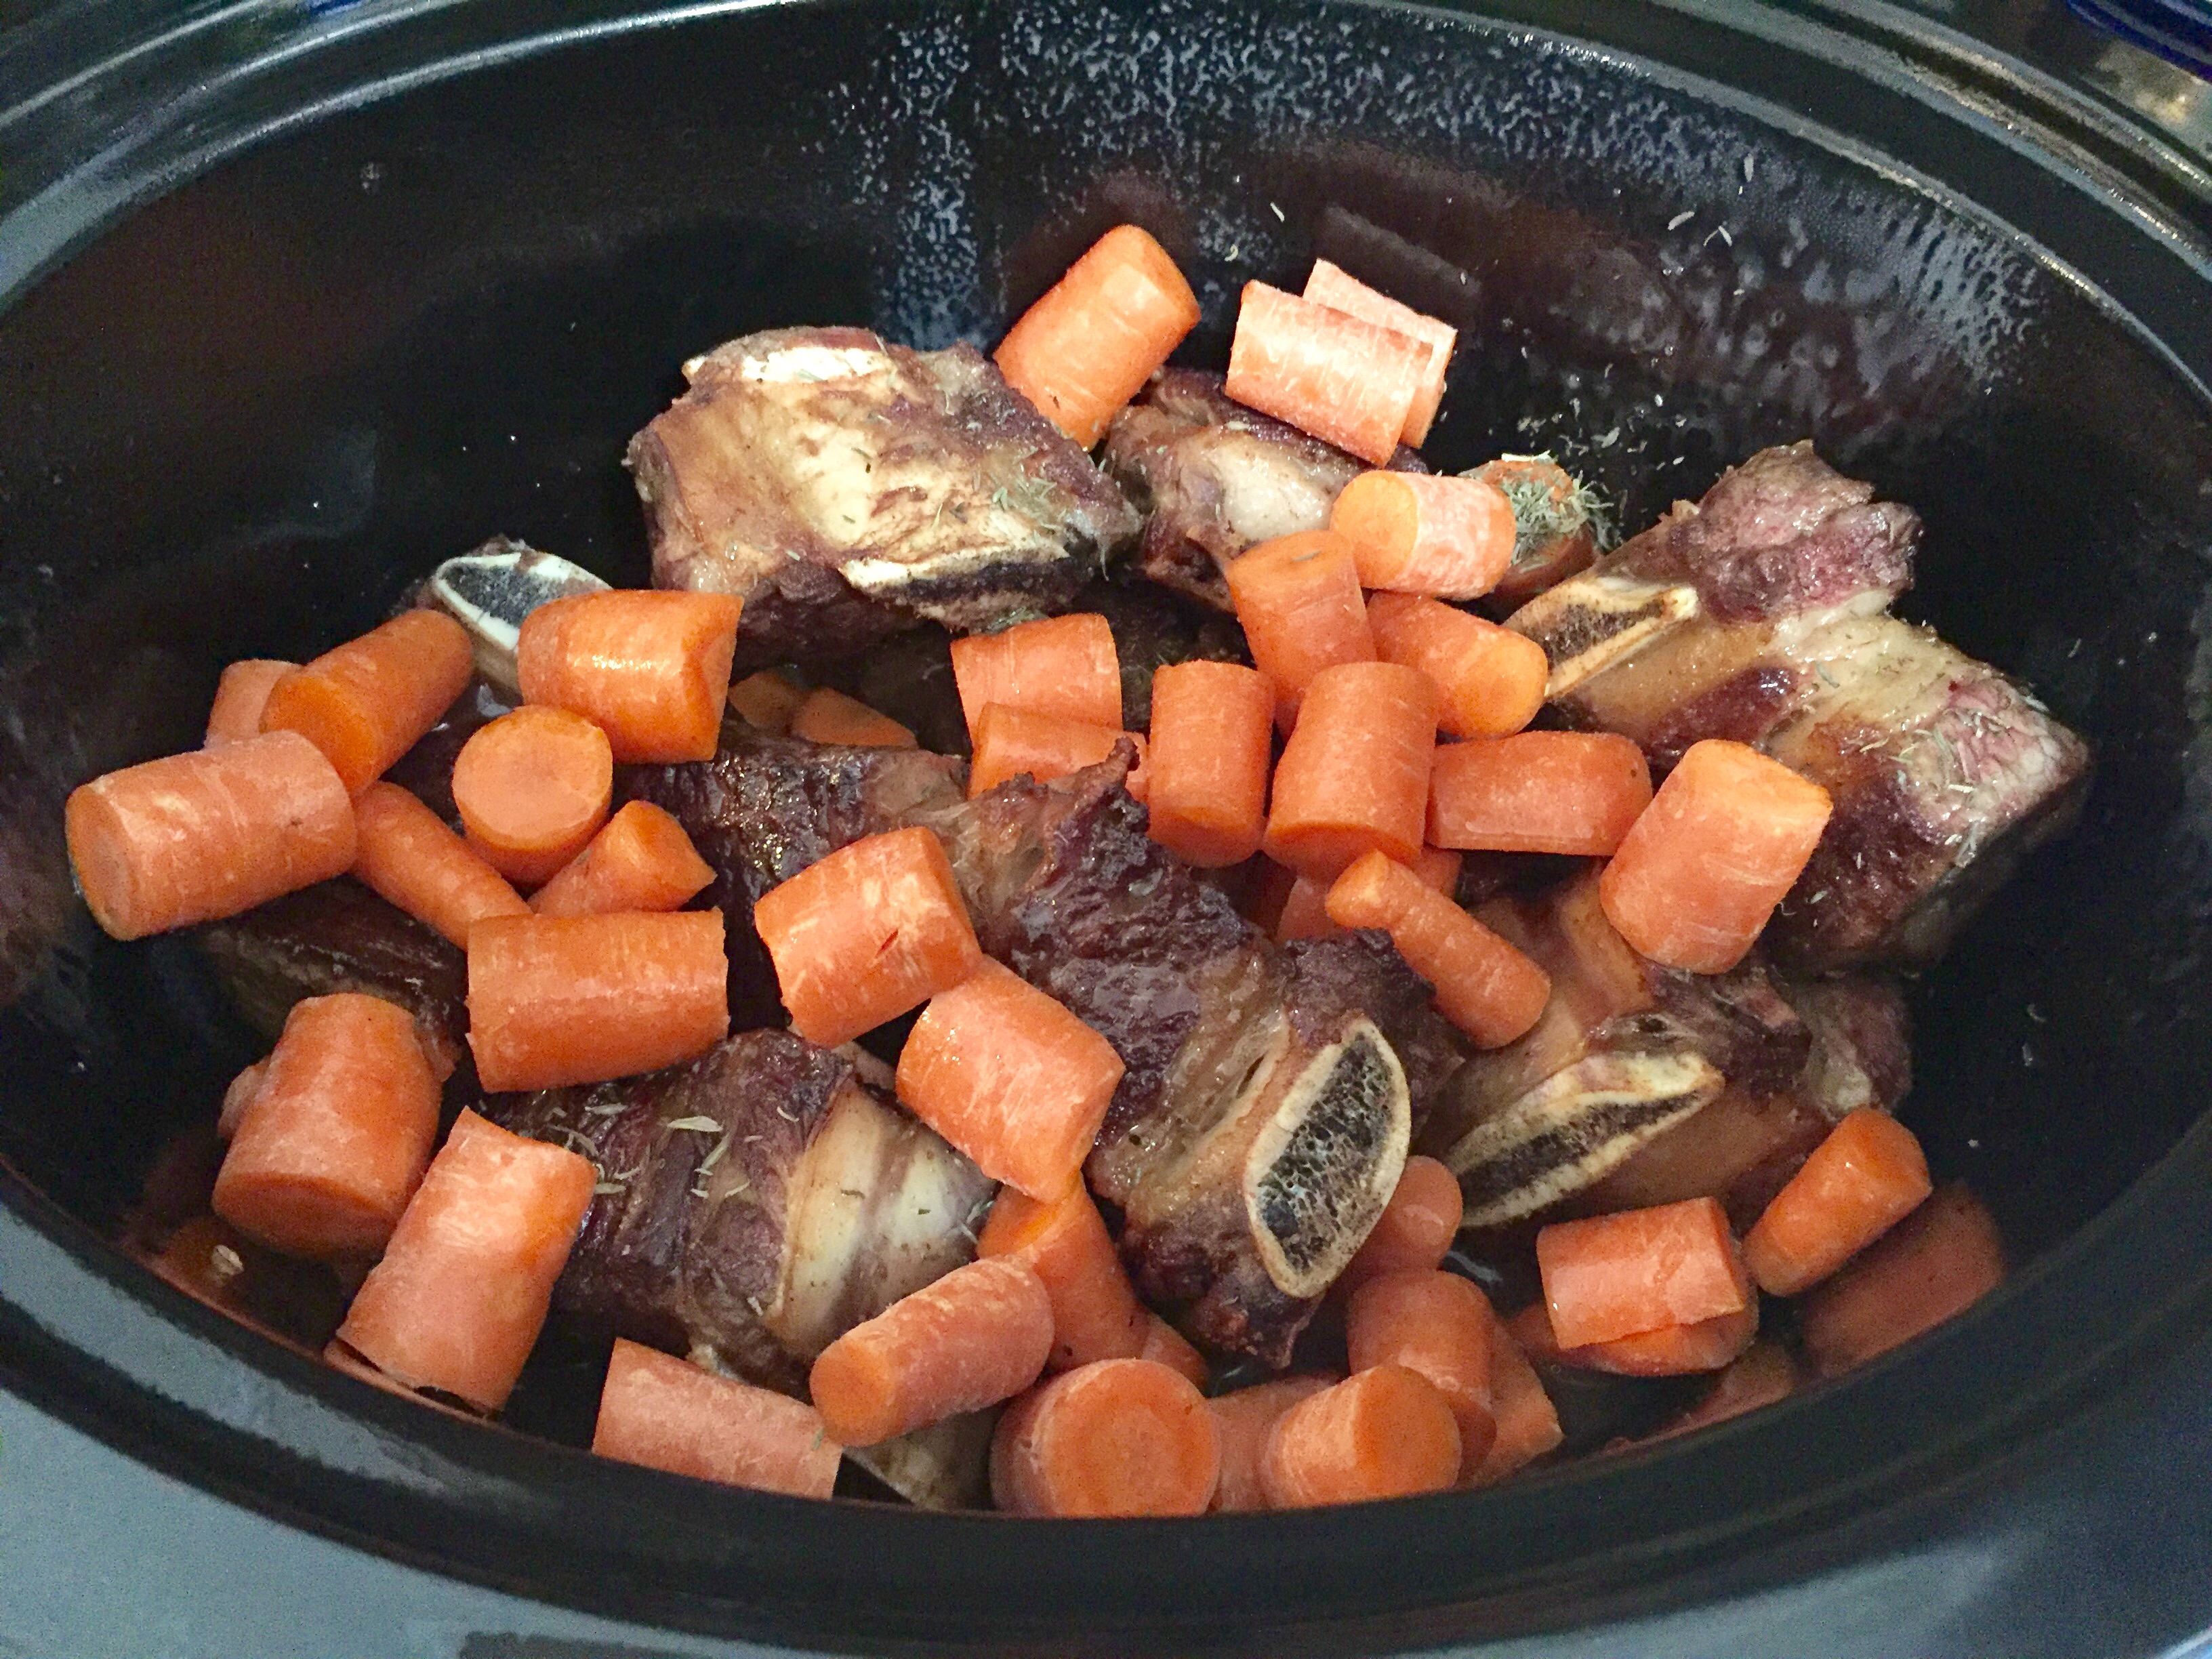 Adding carrots, thyme and stick to short ribs in slow cooker